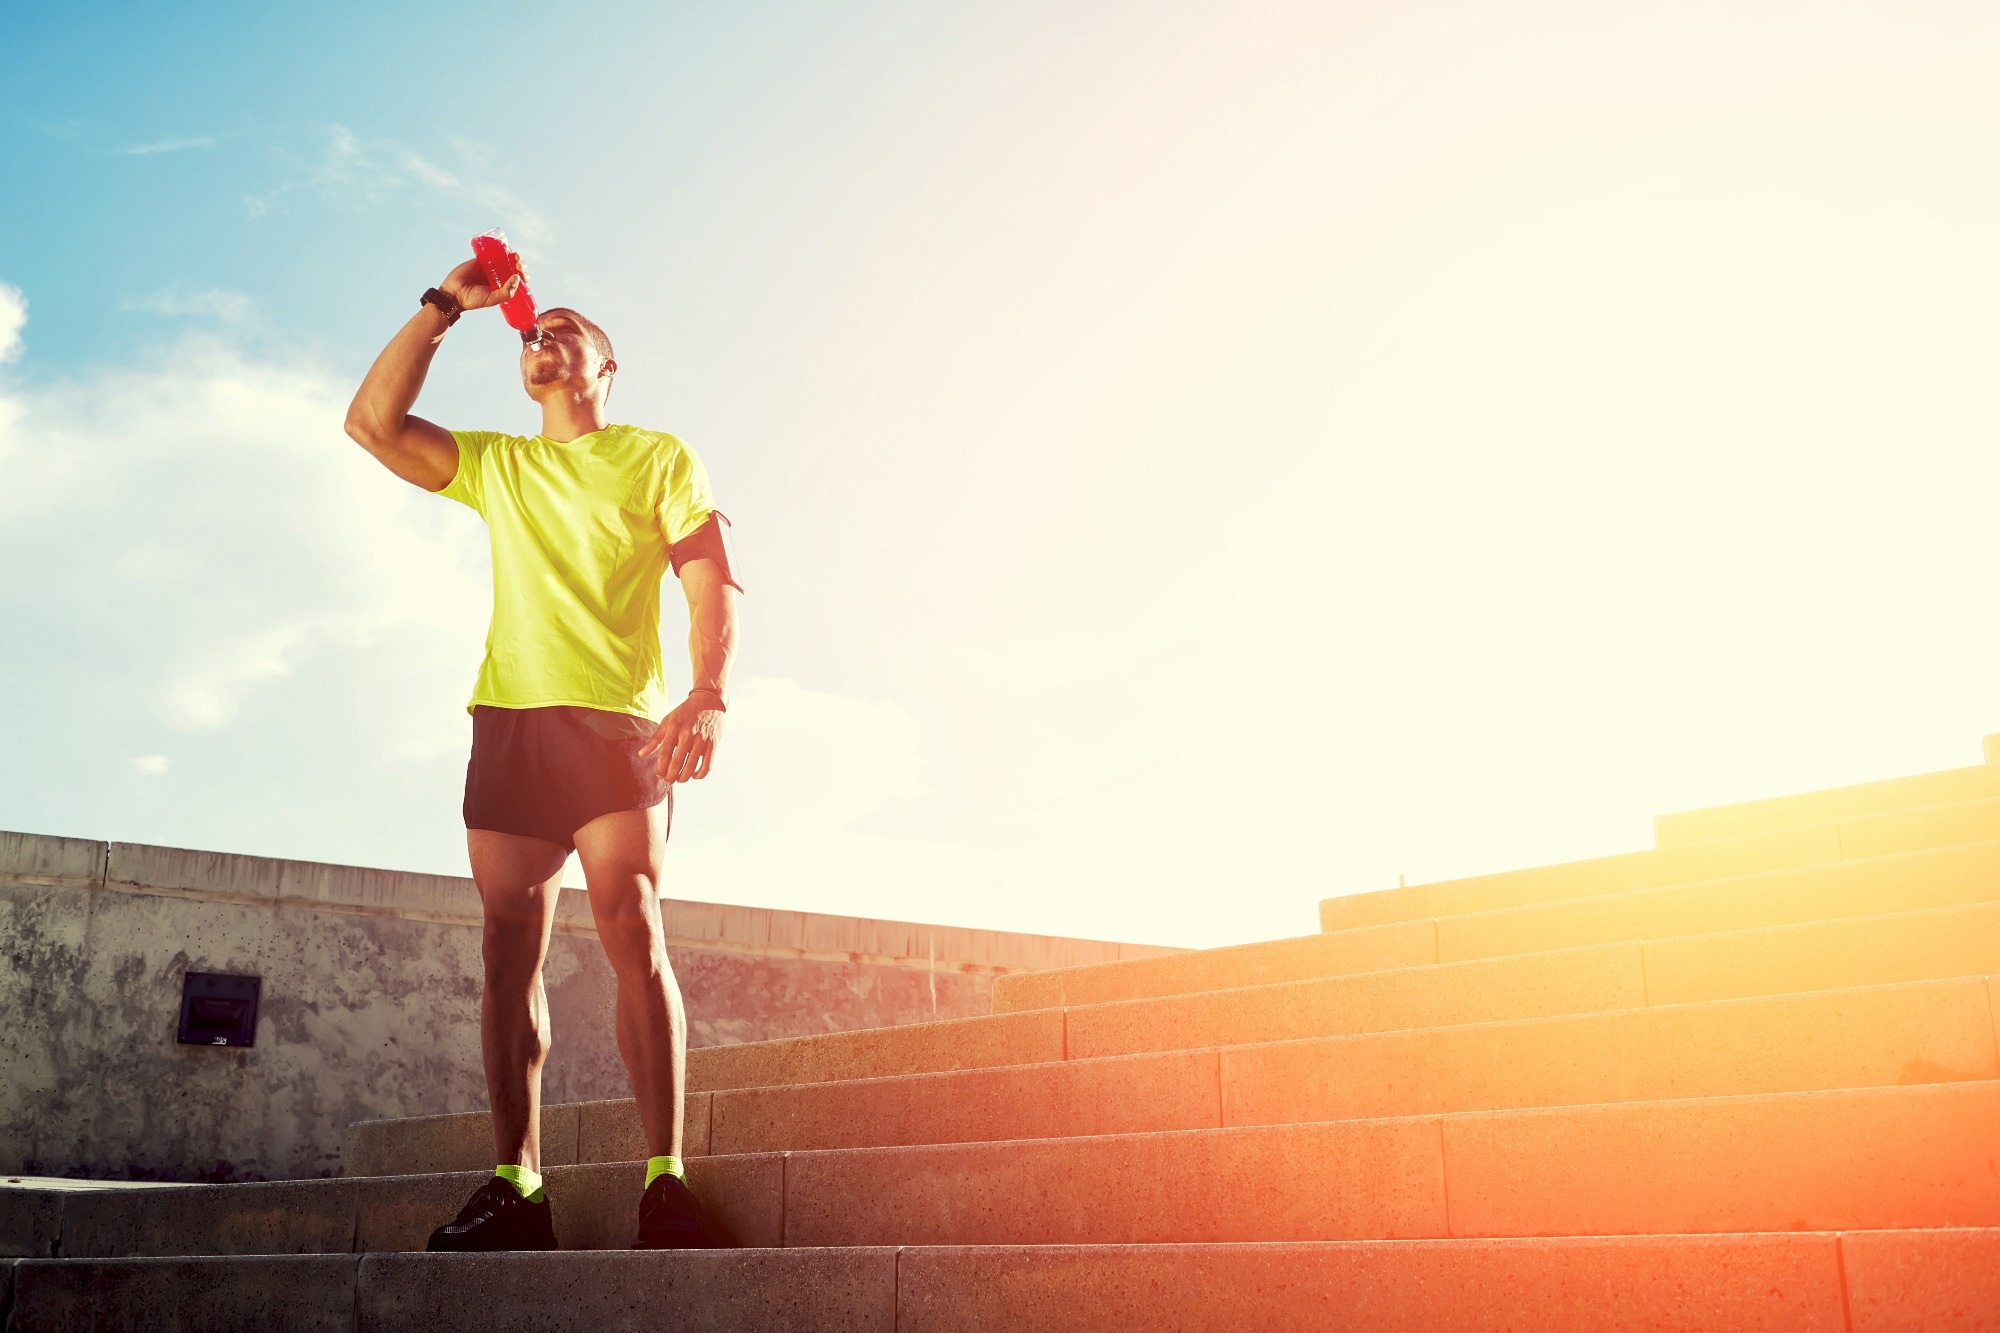 Study: Post-exercise rehydration in athletes: Effects of sodium and carbohydrates in commercial hydration drinks.  Image credit: GaudiLab/Shutterstock